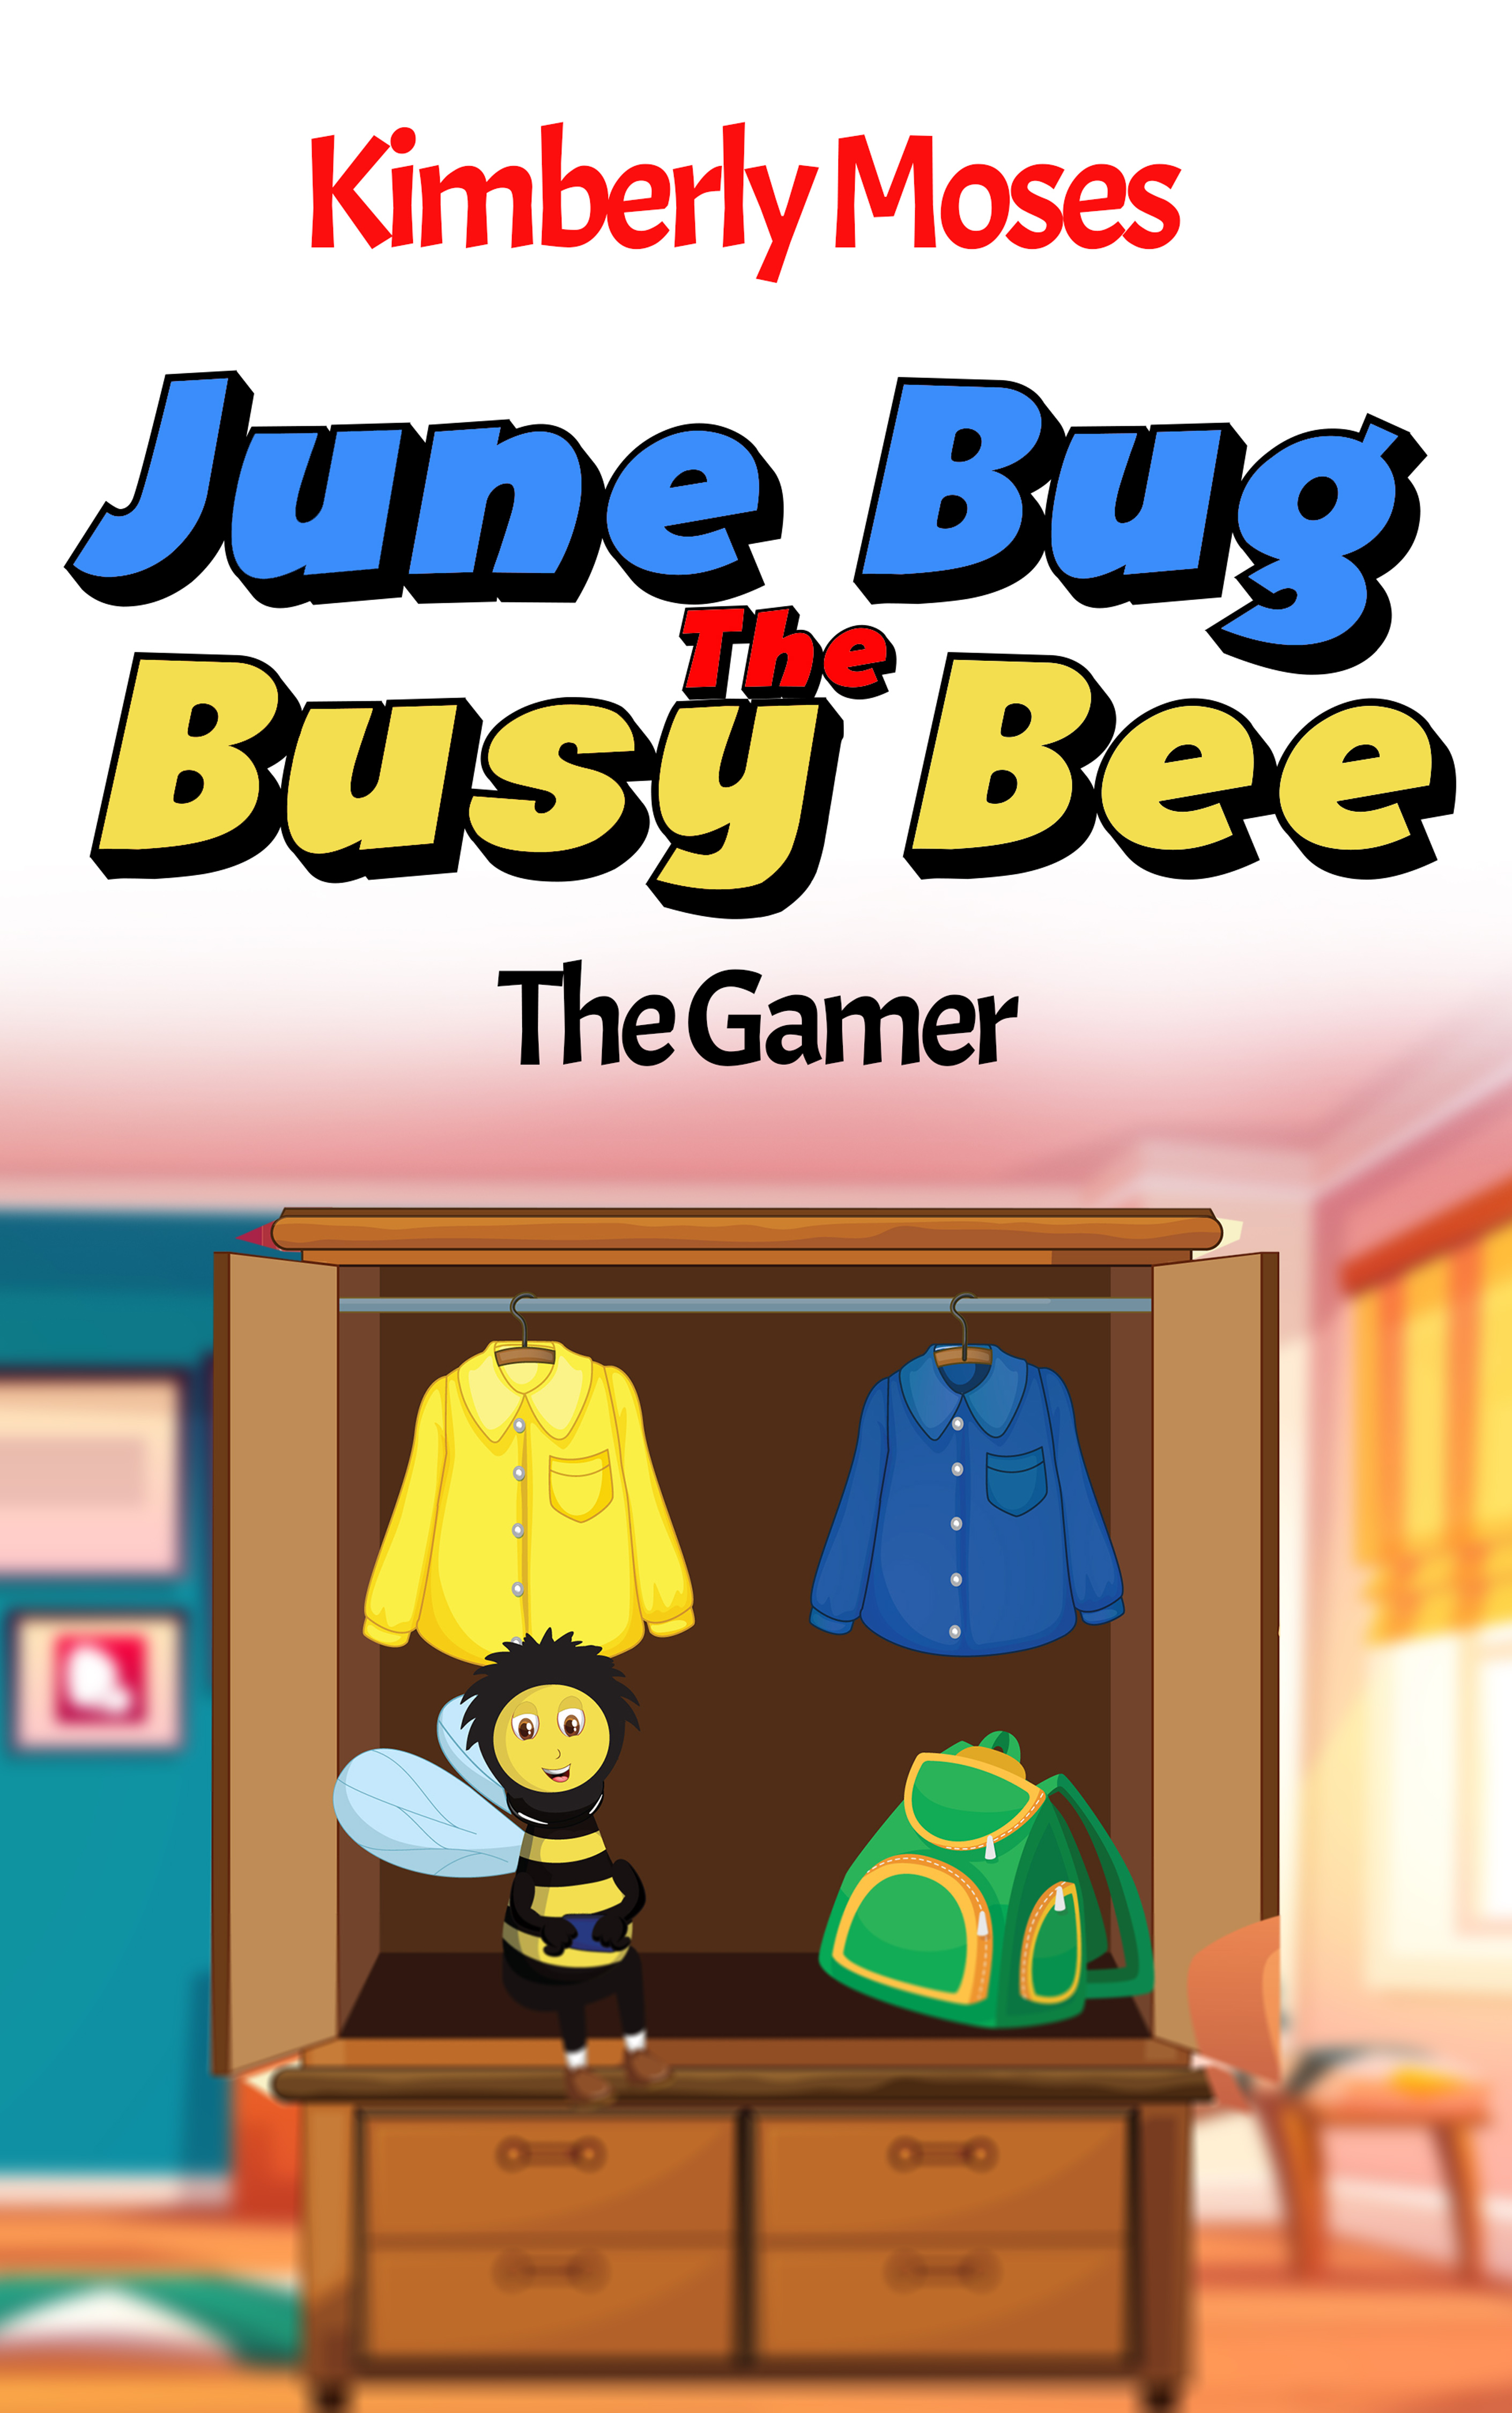 June Bug The Busy Bee: The Gamer